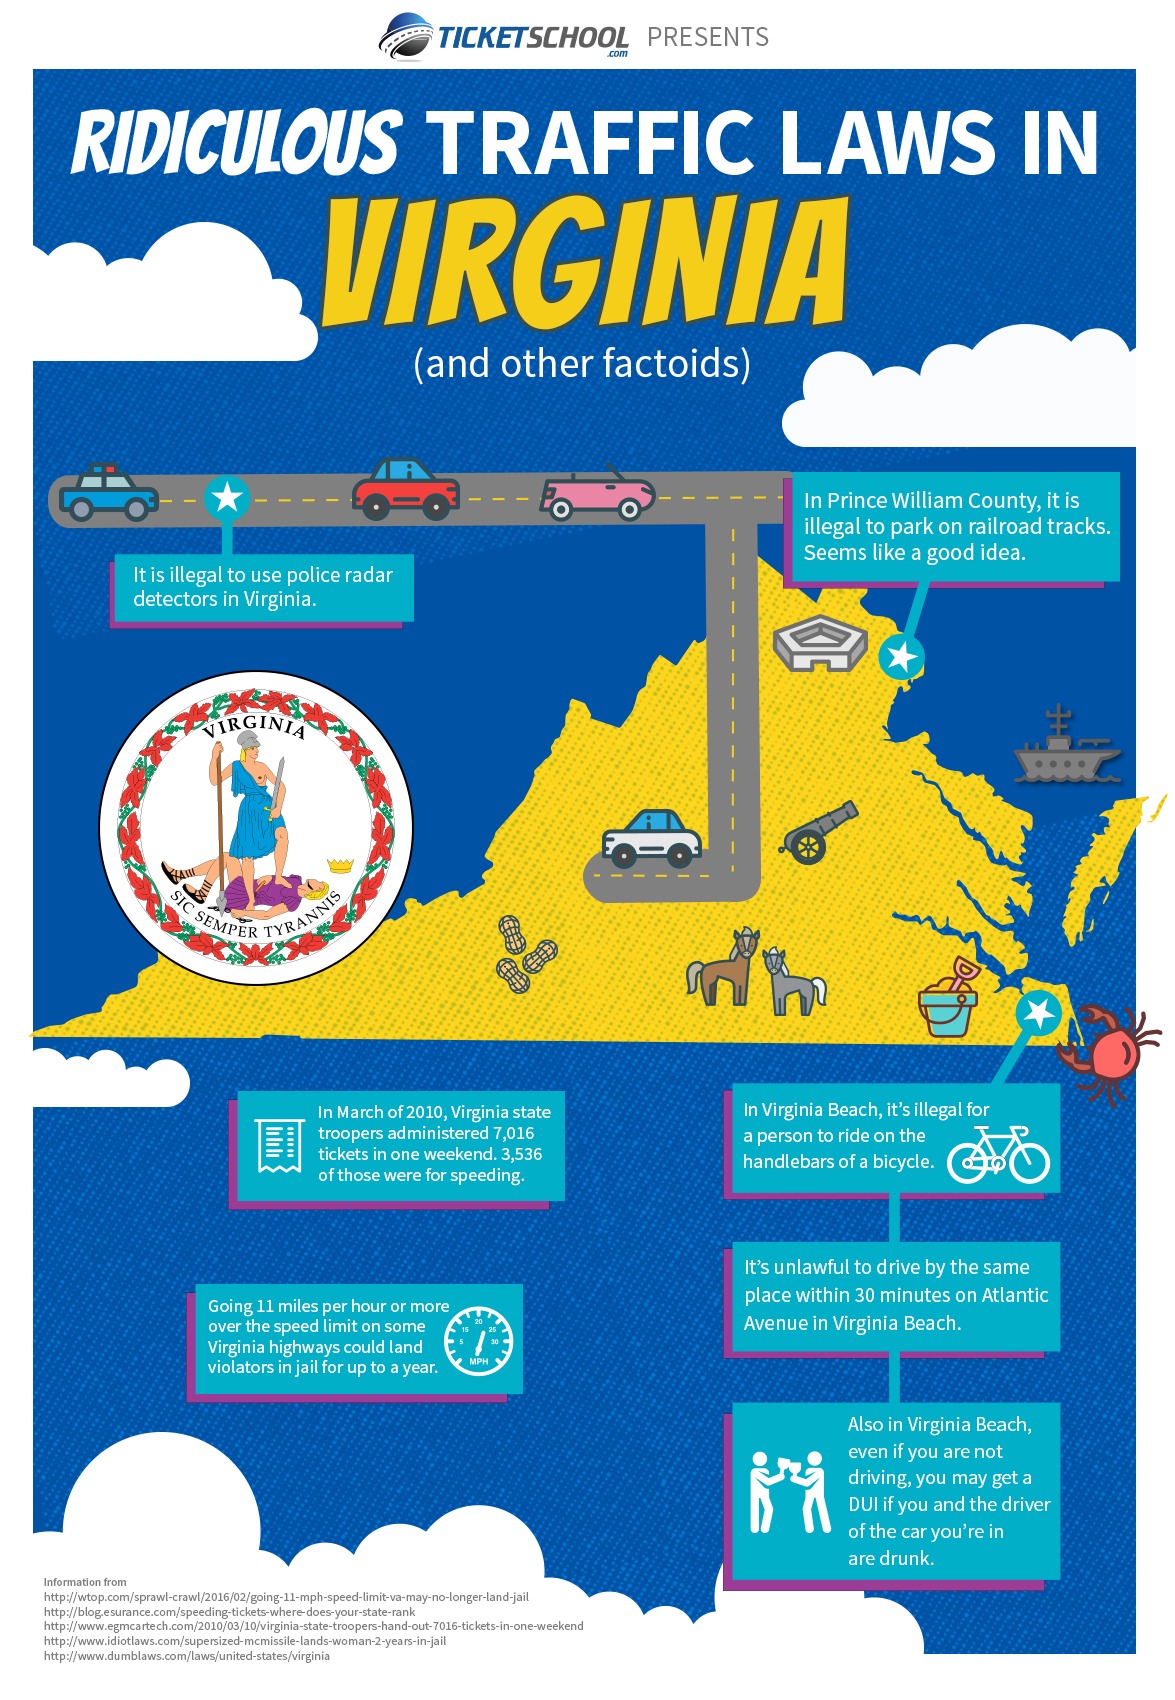 Wacky Virginia Driving Laws and Factoids